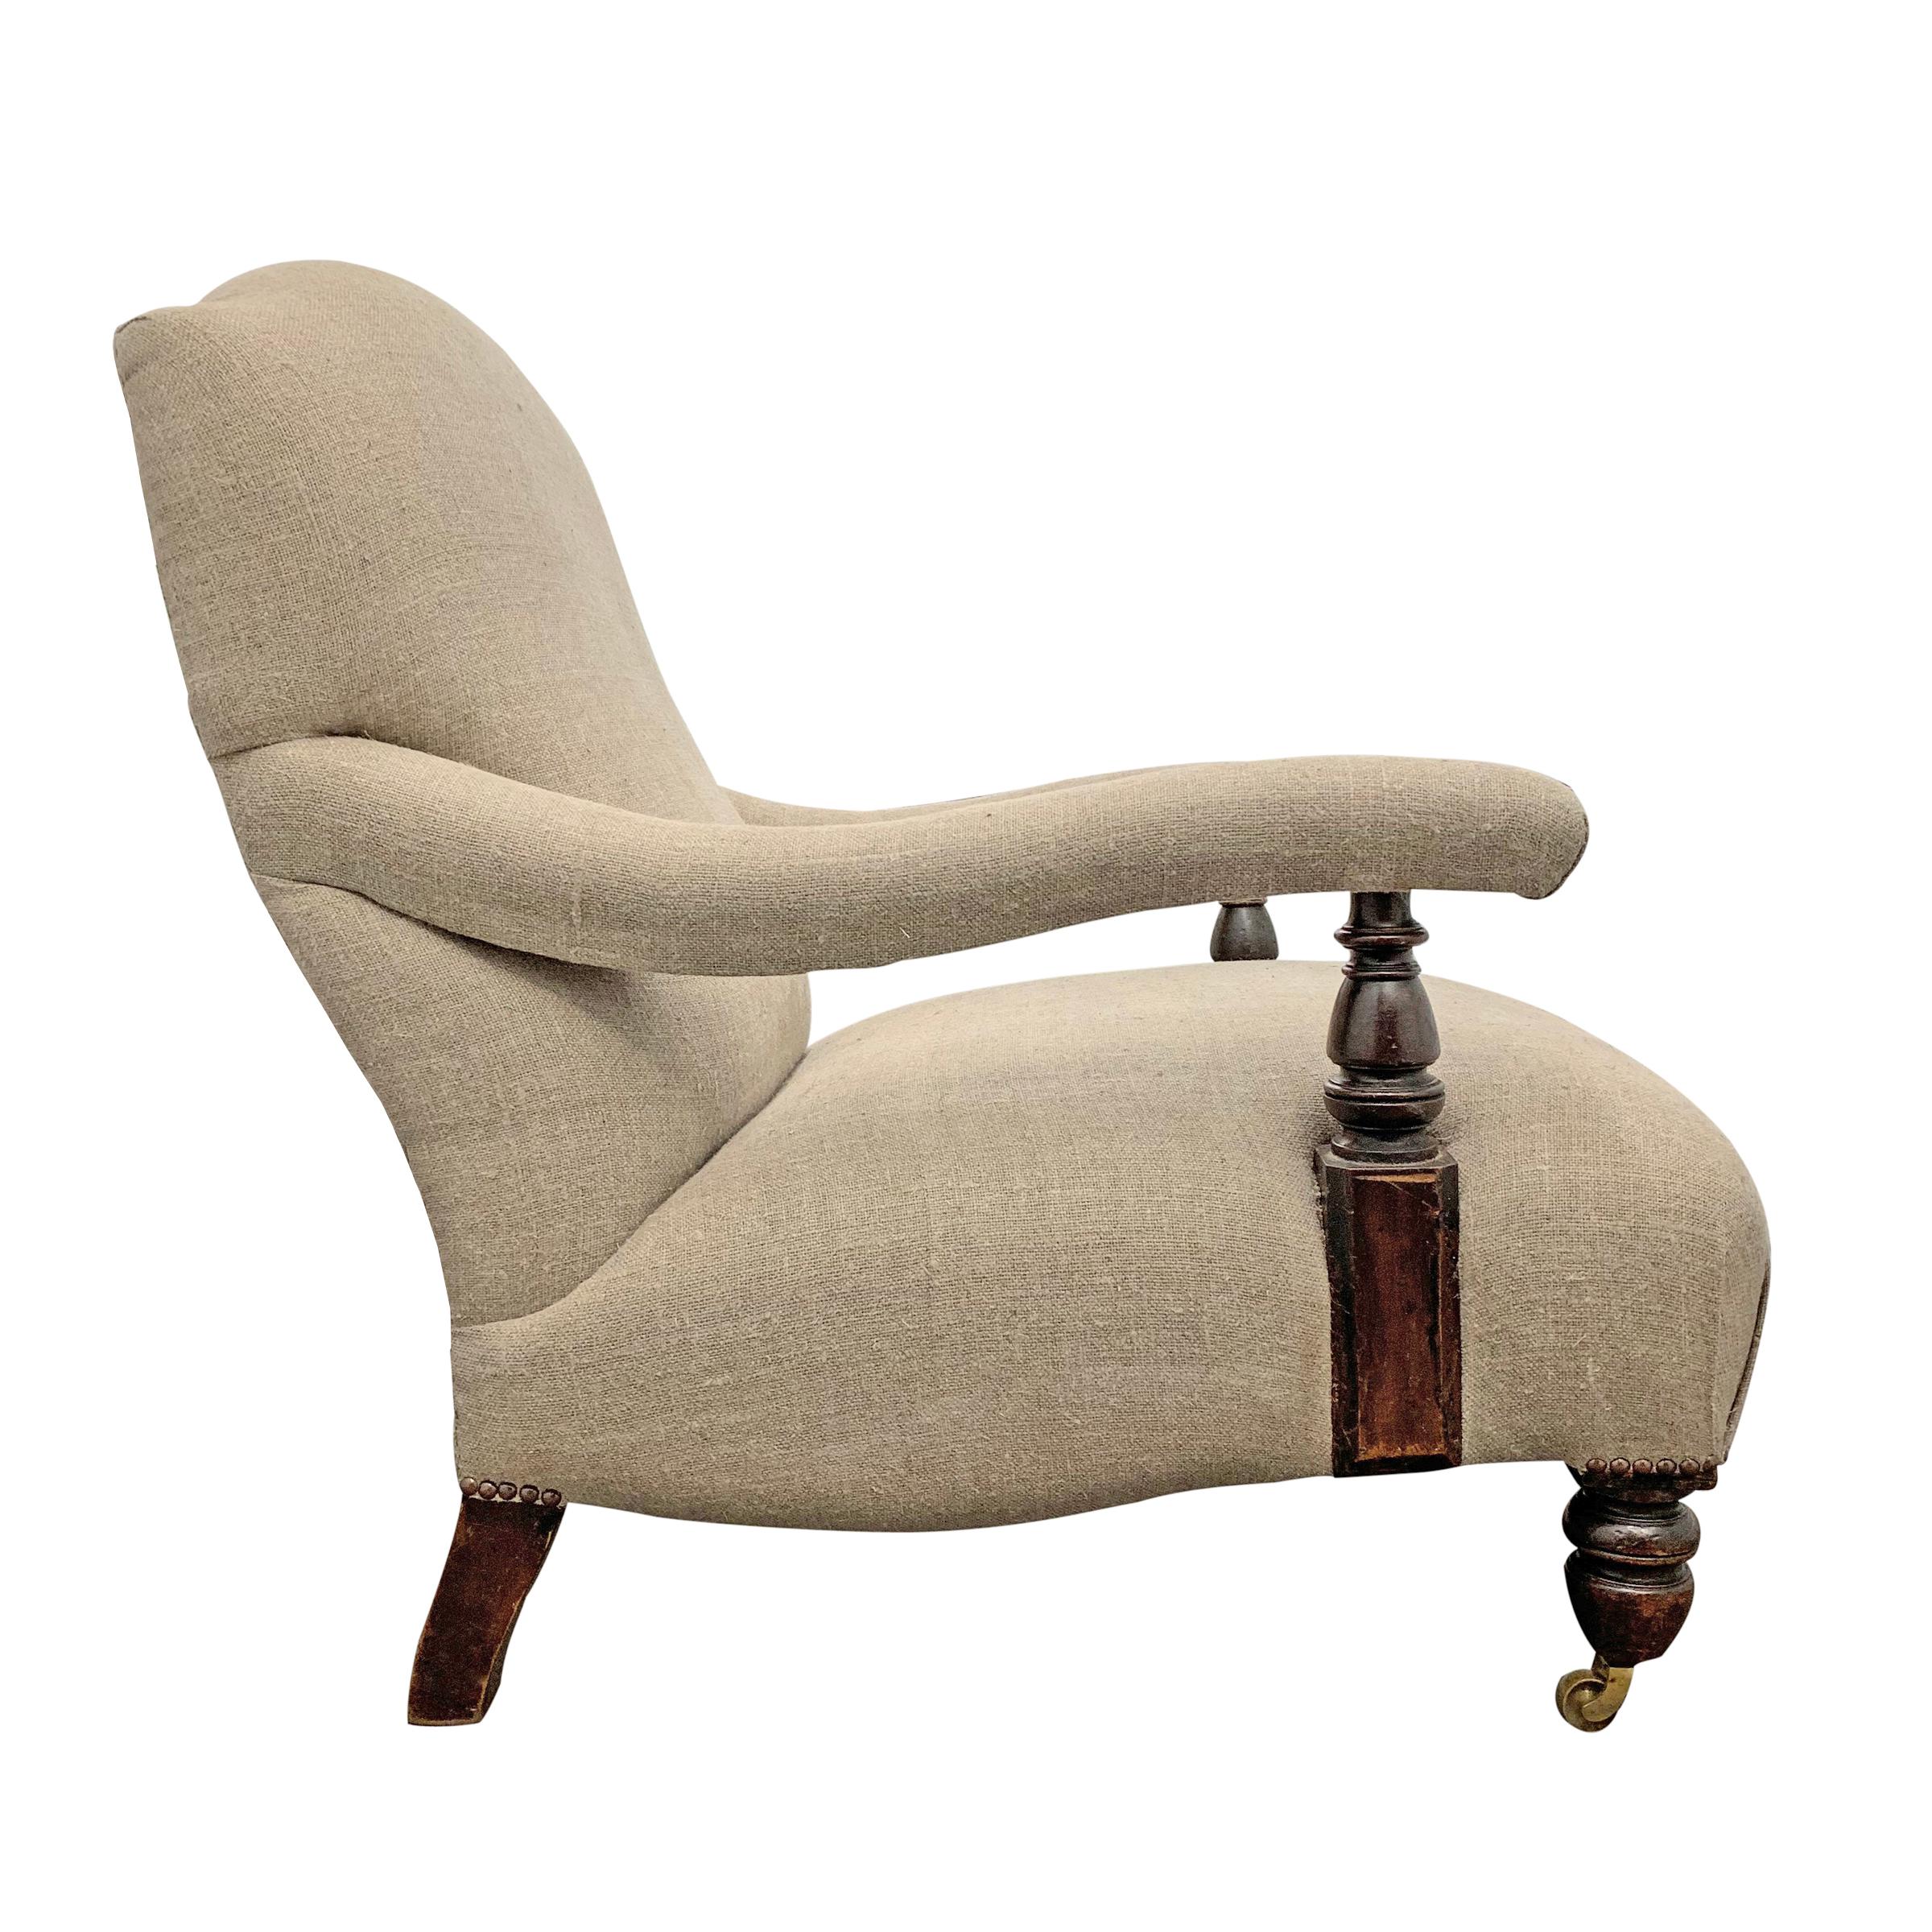 A comfortable 19th century English country house armchair with gently curved arms, newly upholstered in a heavy linen with a re-sprung seat, and short turned wood legs with brass casters on the front two legs.